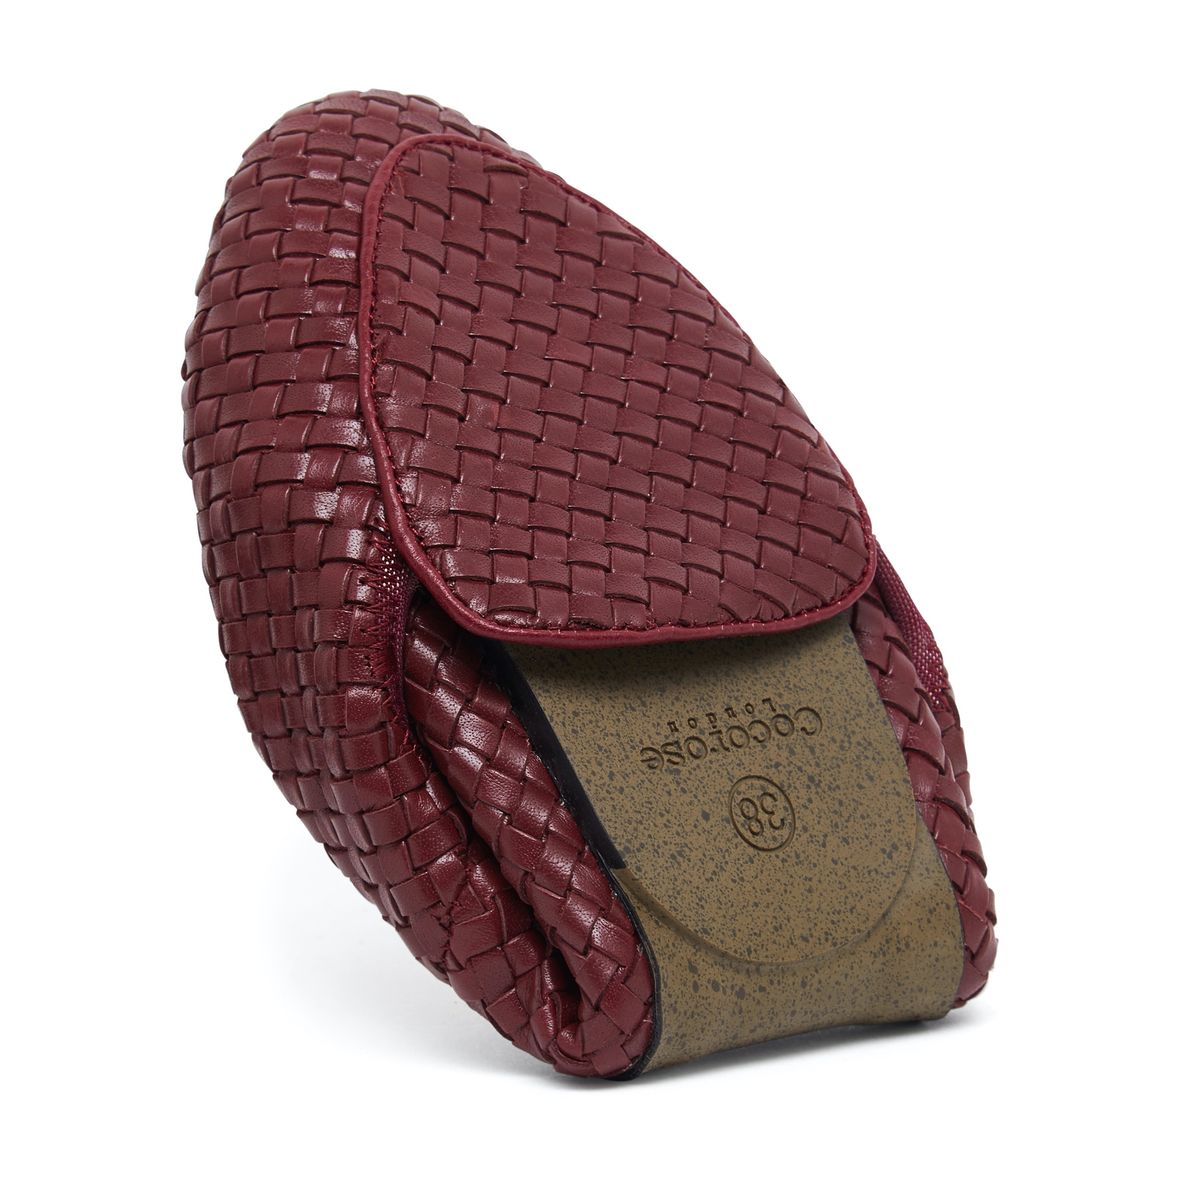 Burgundy 'Clapham' loafer from Cocorose London